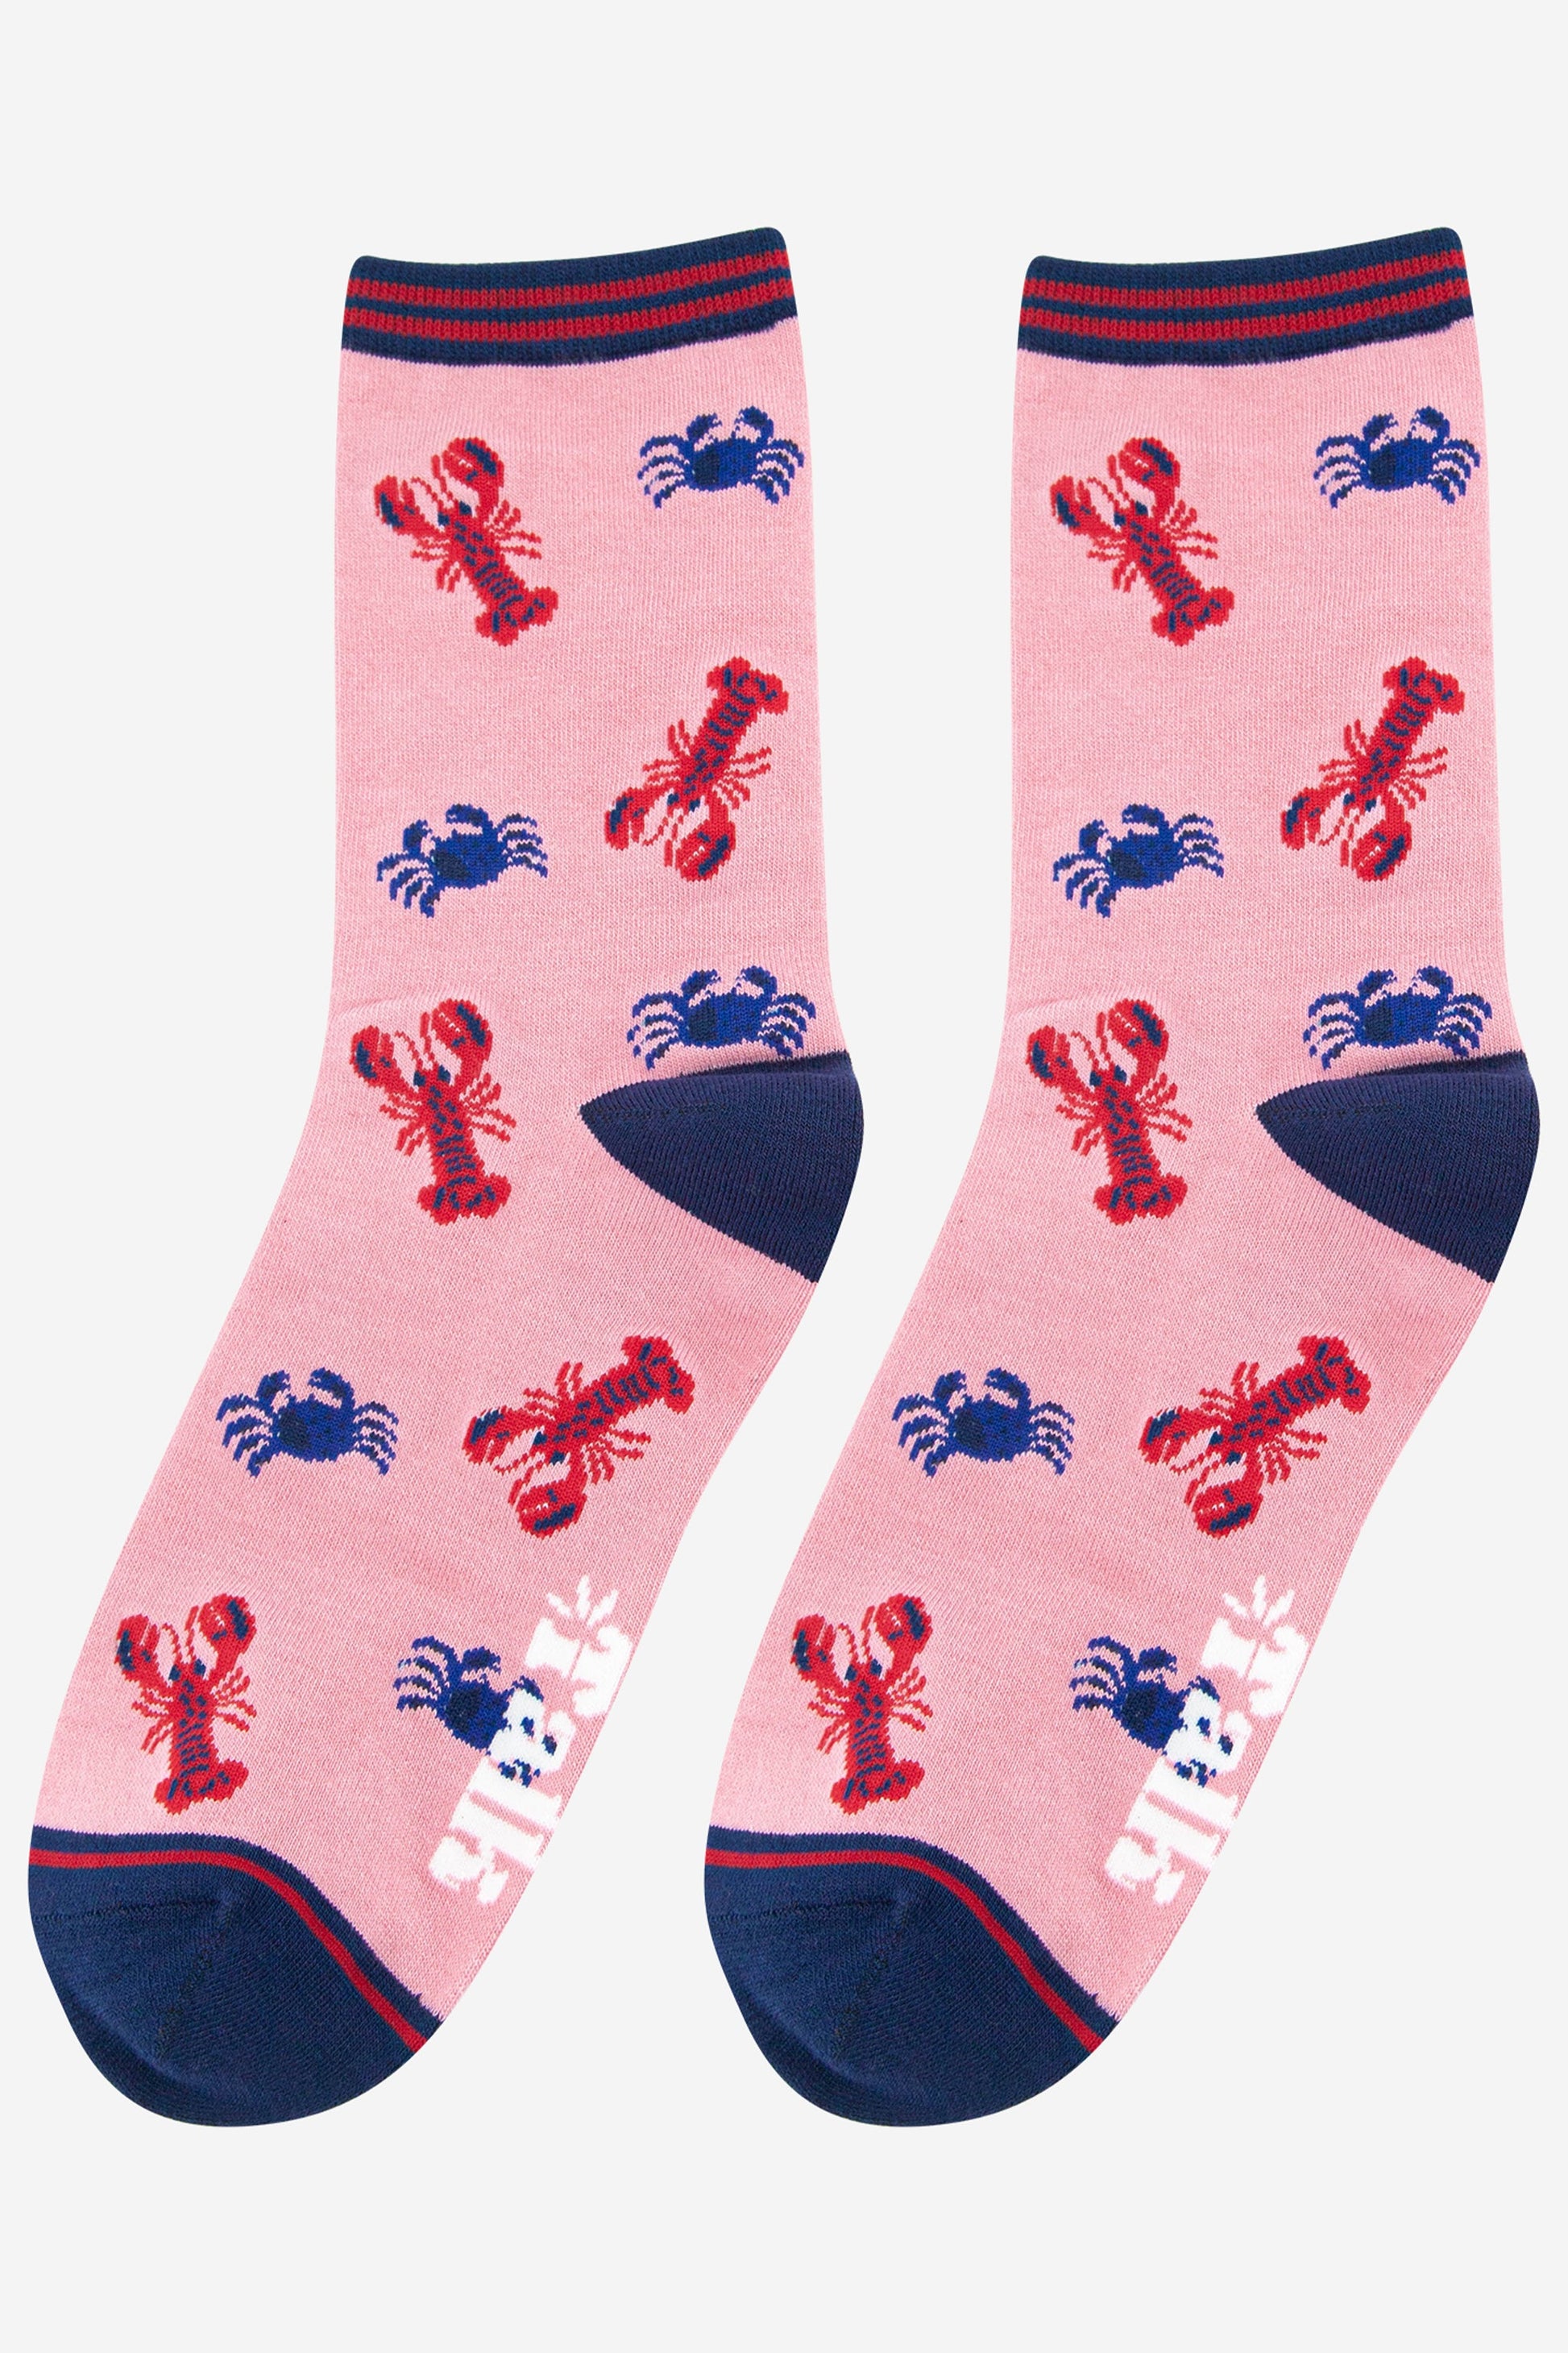 pink bamboo lobster socks for women with a navy blue toe, heel and striped cuff